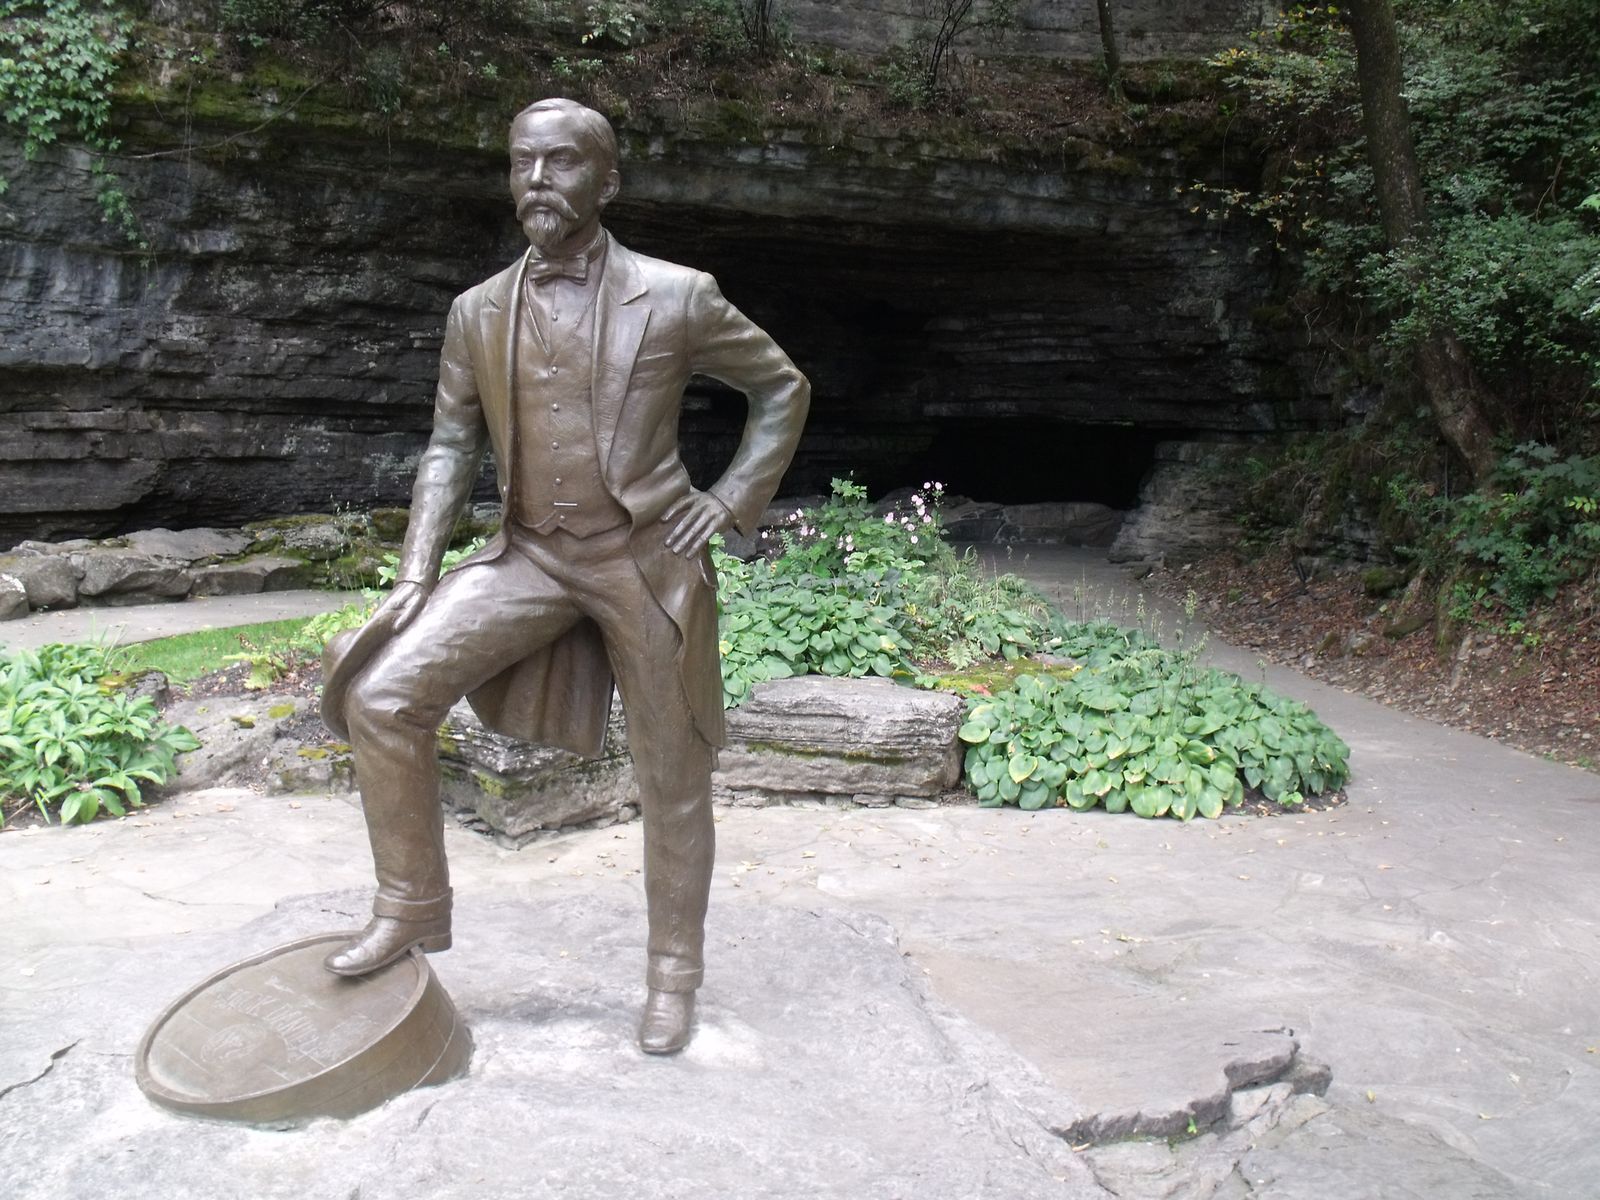 American distiller Jack Daniel, whose name still graces a famous whisky, was not the only one responsible for creating the beverage. He actually learned his trade from Nathan Nearest Green, a slave who’s just beginning to gain <a href="https://www.usatoday.com/story/money/nation-now/2017/07/21/ex-slave-who-trained-jack-daniel-gets-new-recognition/498391001/" rel="noreferrer noopener">recognition for his role</a> in the successful enterprise.